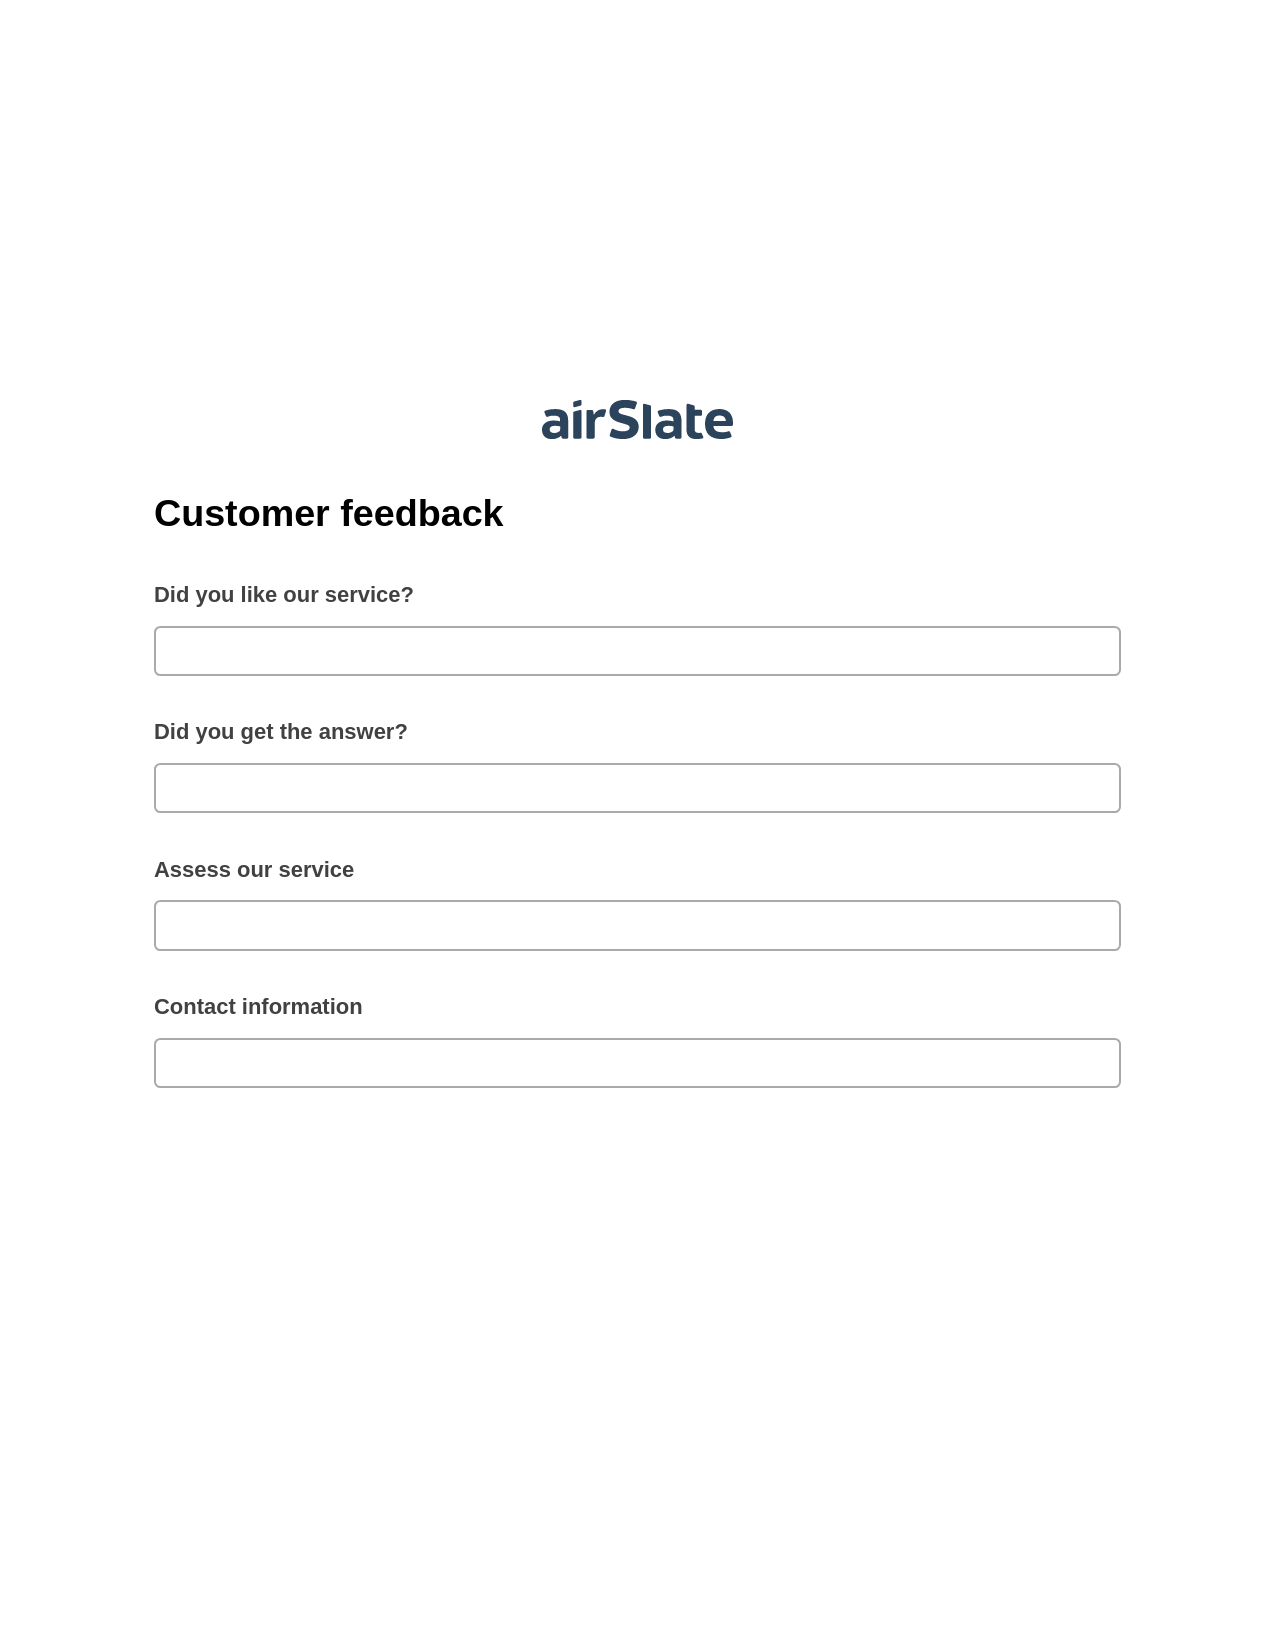 Customer feedback Pre-fill from CSV File Bot, Create slate addon, Export to Smartsheet